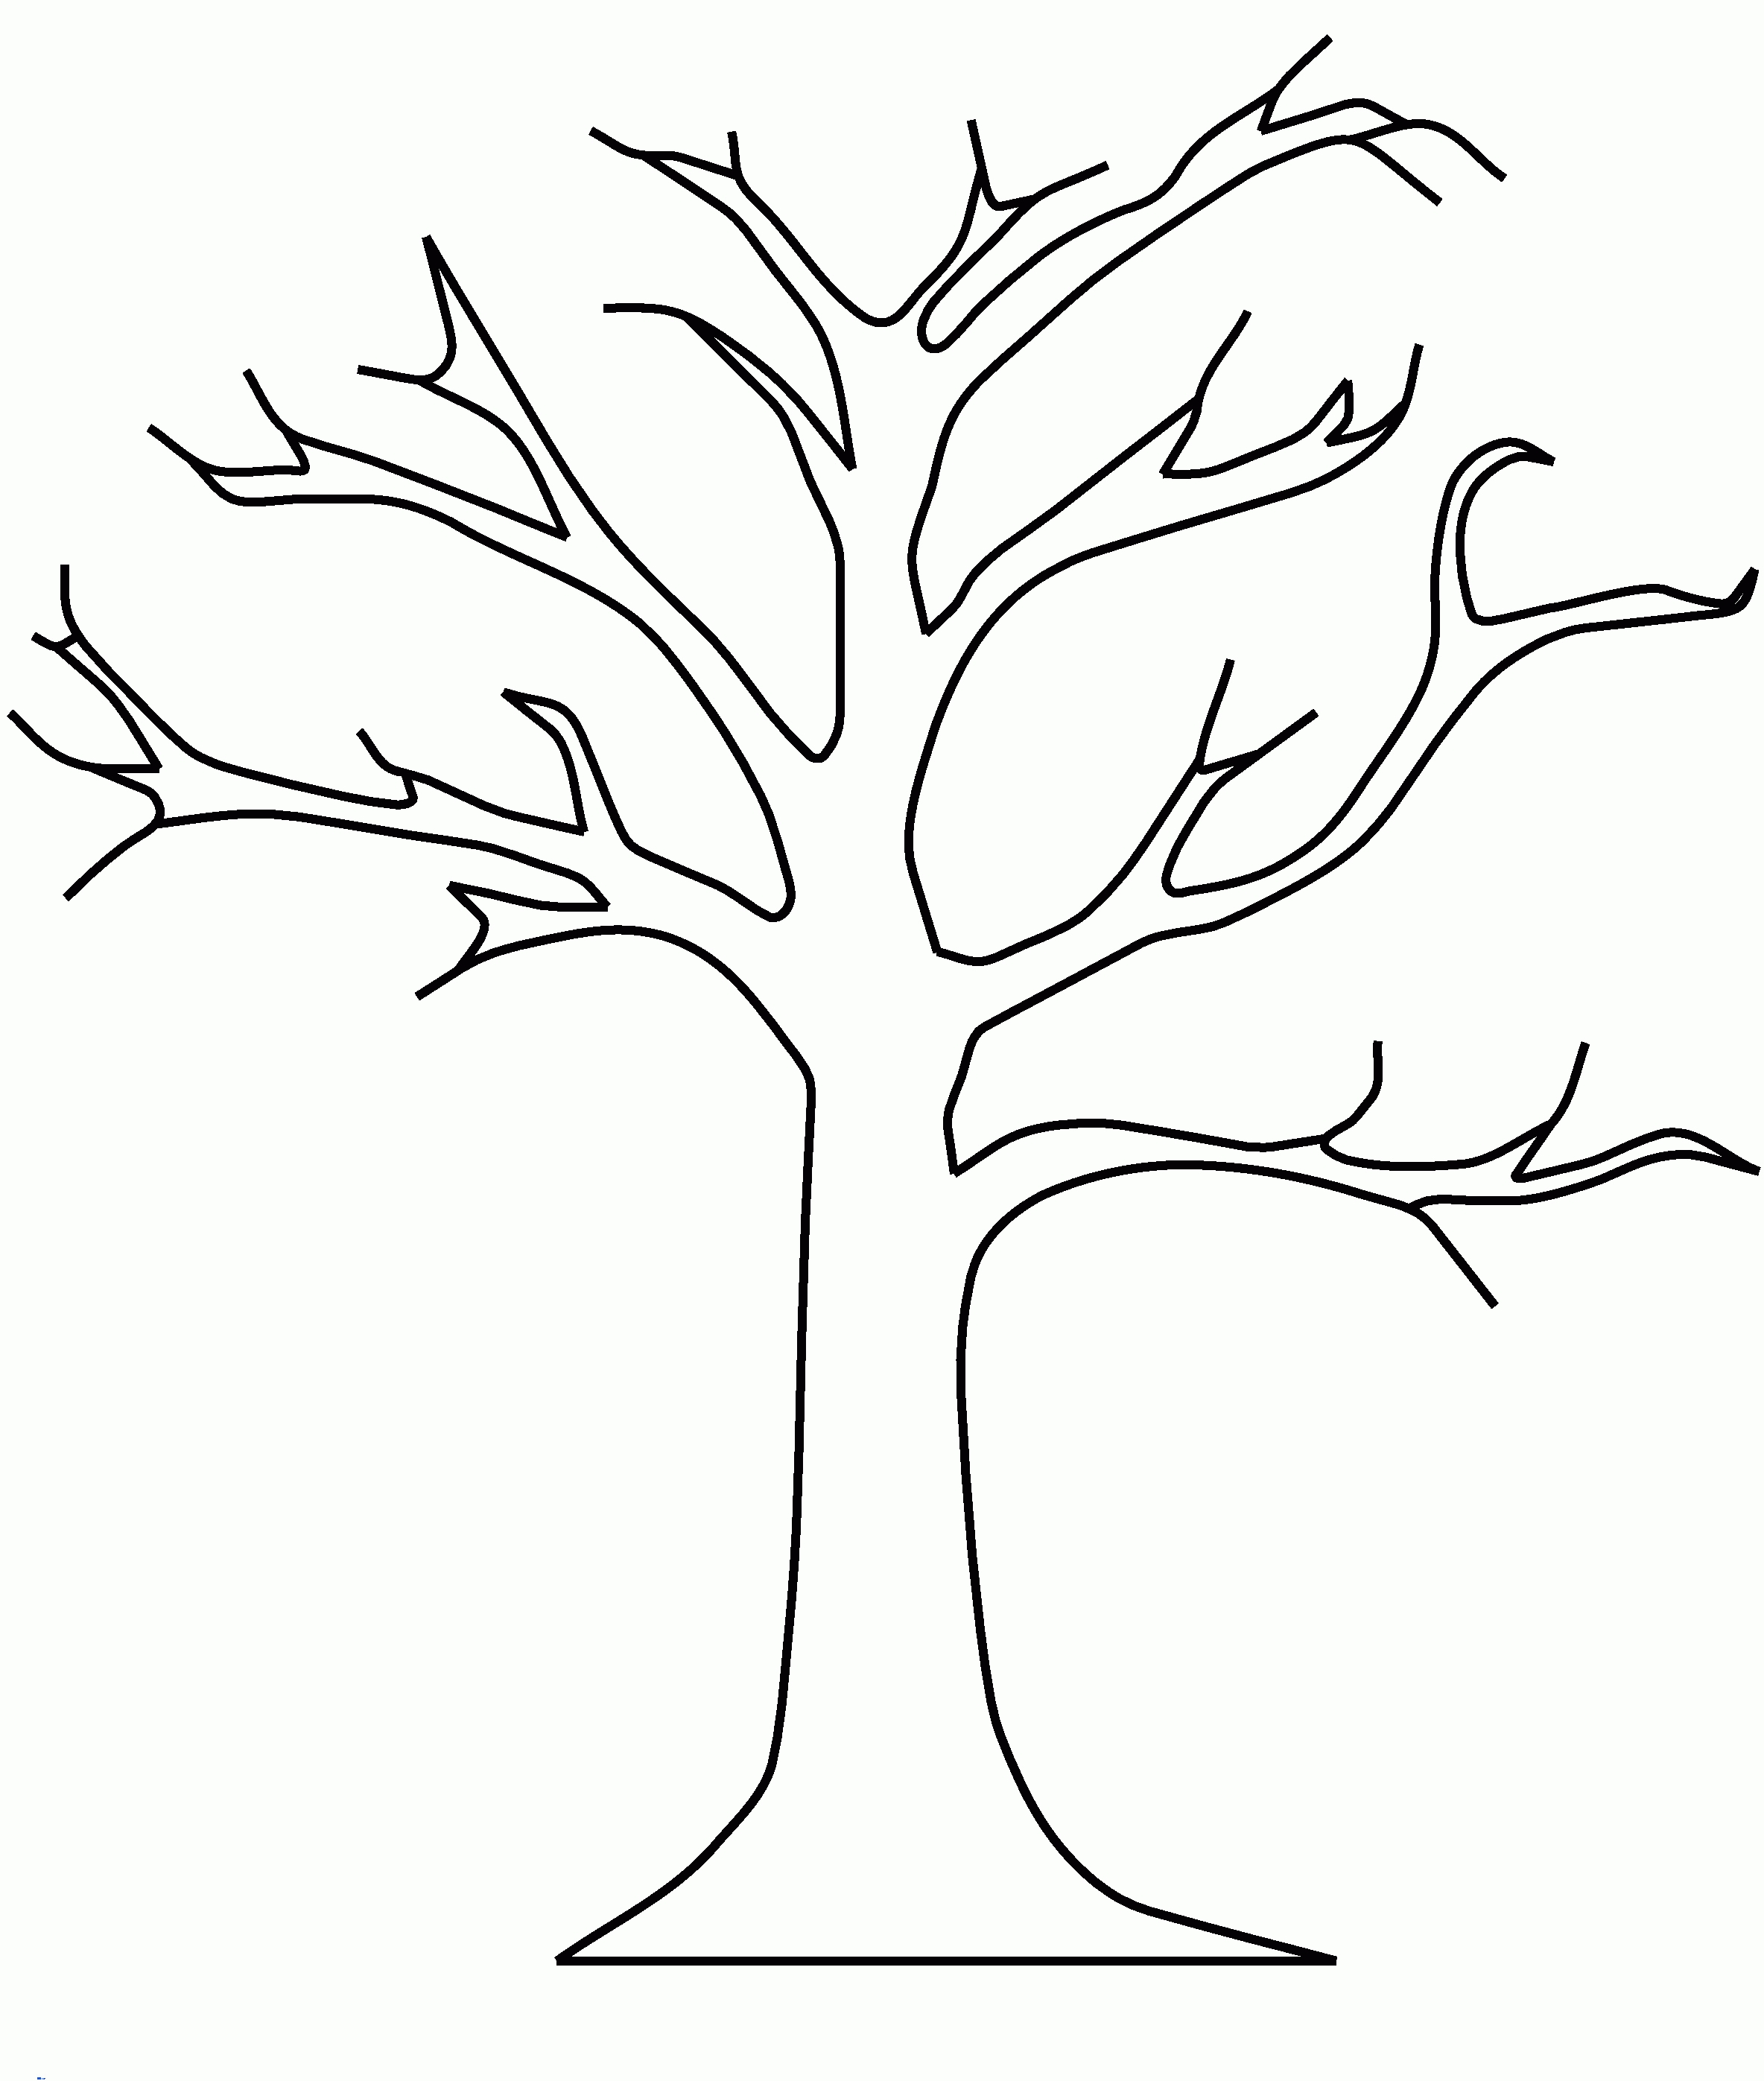 Coloring Pages Leafless Tree Printable | Coloring For Kids 2018